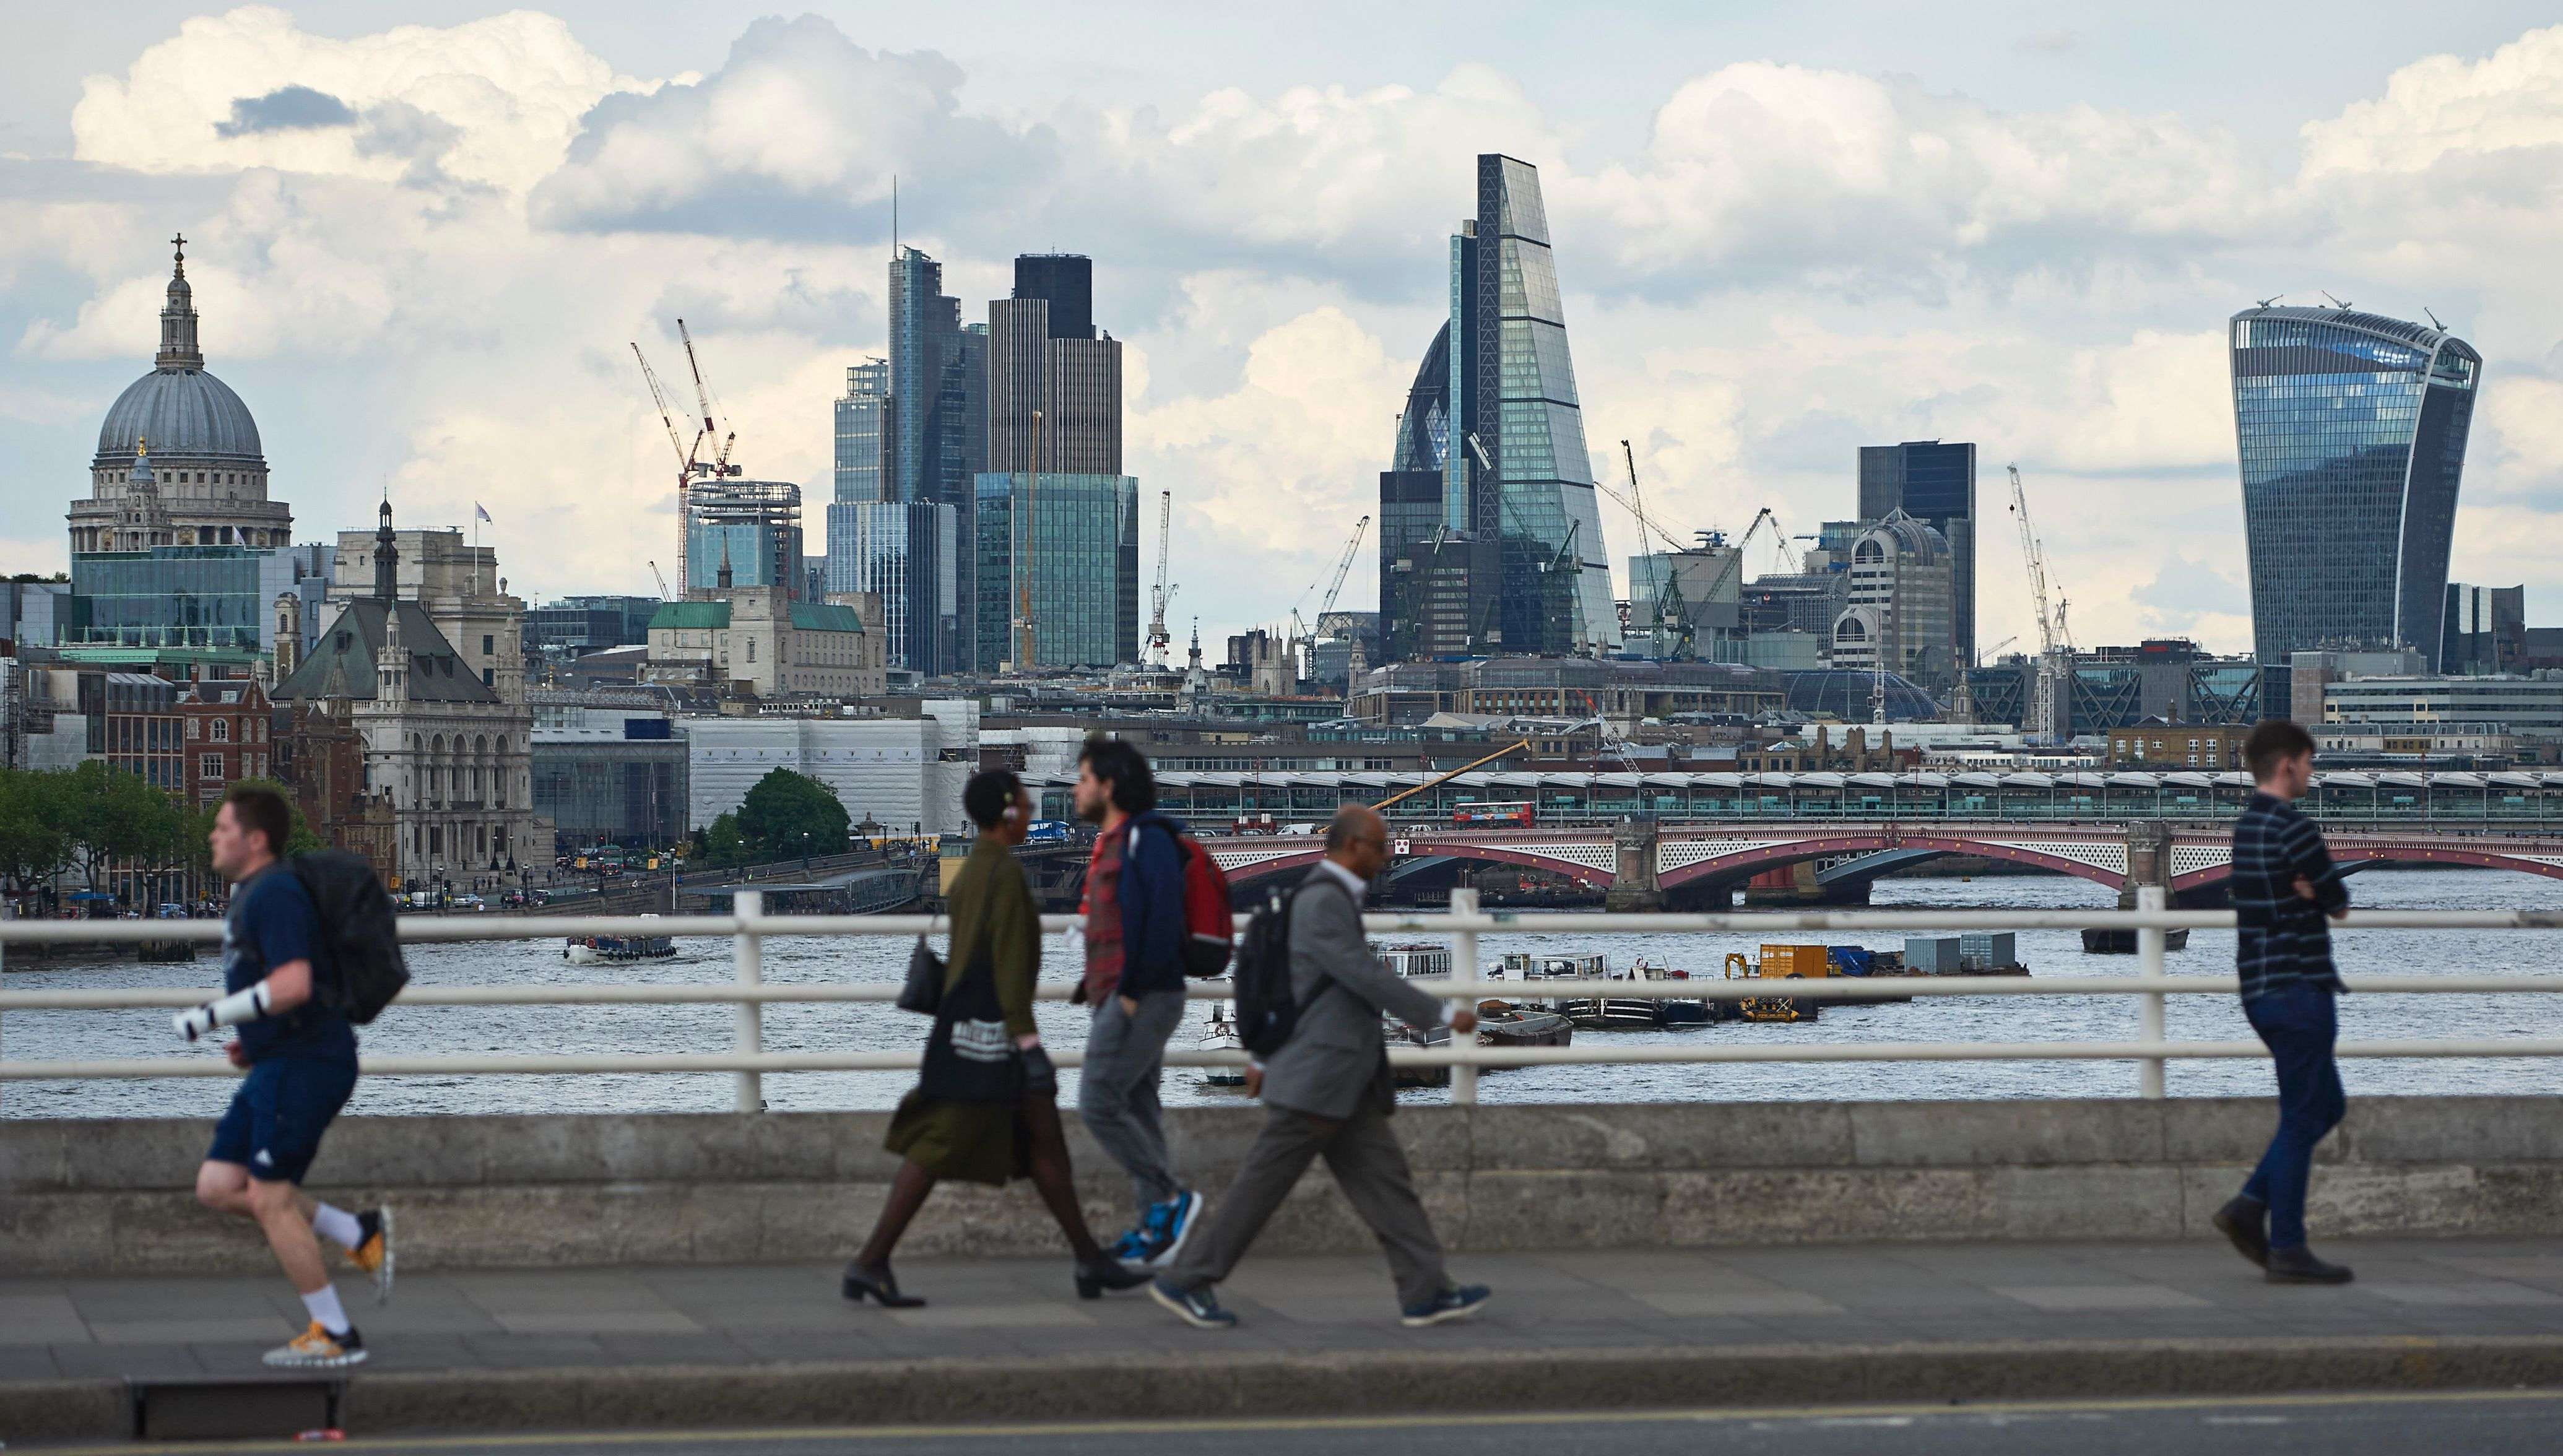 The London skyline from Waterloo Bridge. The recent Brexit vote has left potential Chinese buyers of British property sitting on the fence, say agents. With many looking to Canada, Australia and the US as safer alternatives. Photo: Niklas Halle’n, AFP.